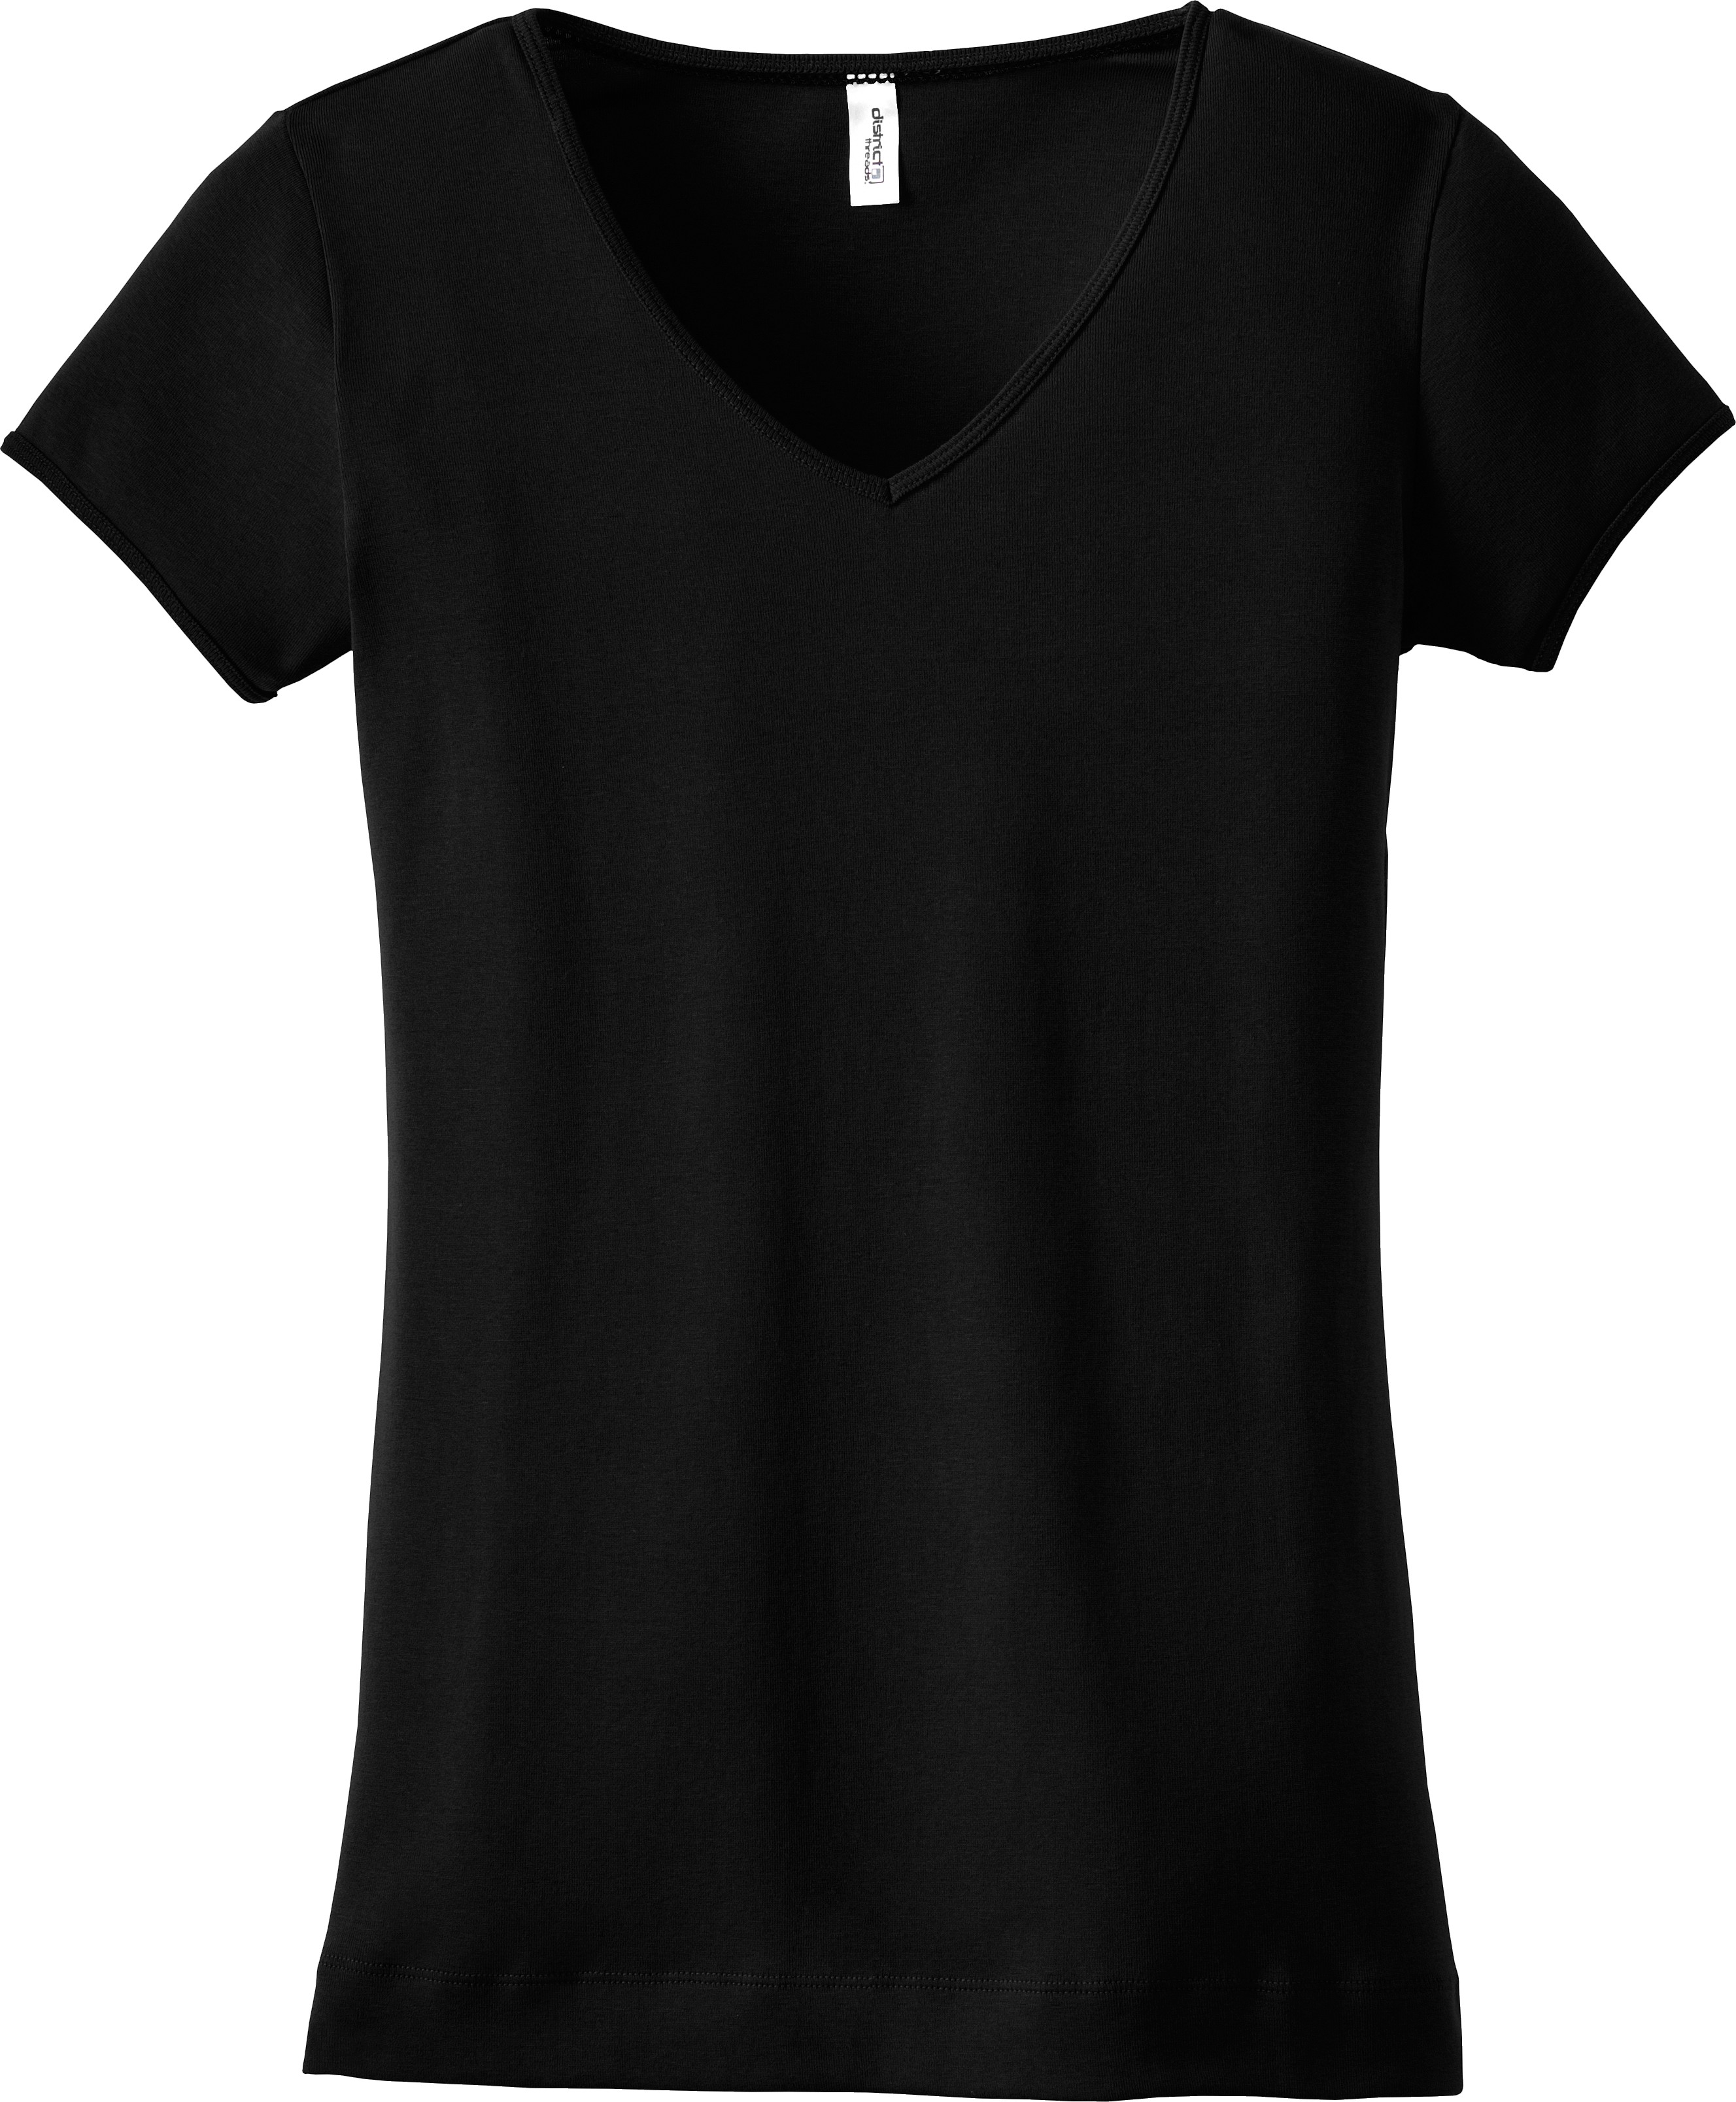 Blank V Neck T Shirt Template - PROFESSIONAL TEMPLATES | PROFESSIONAL ...